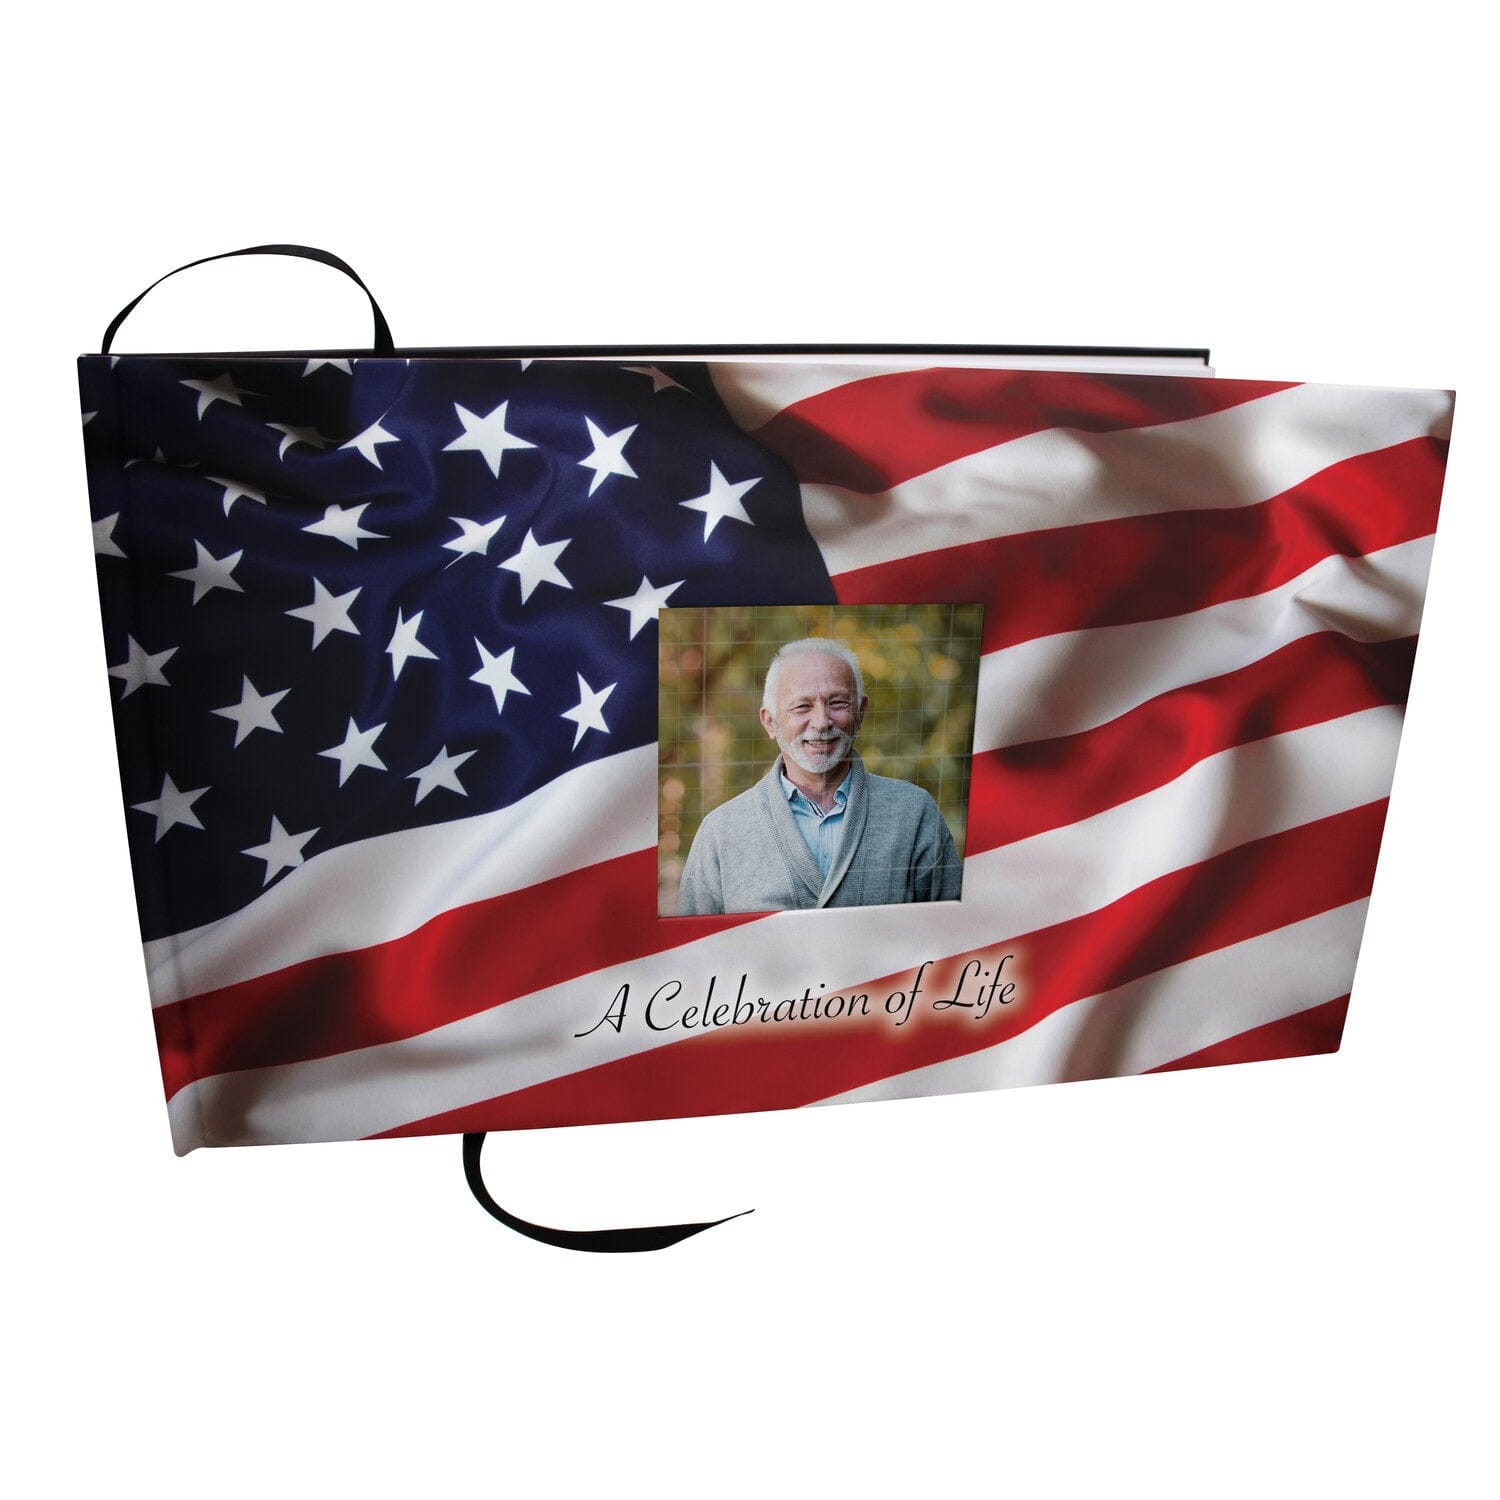 Commemorative Cremation Urns Home & Garden American Flag Matching Themed 'Celebration of Life' Guest Book for Funeral or Memorial Service